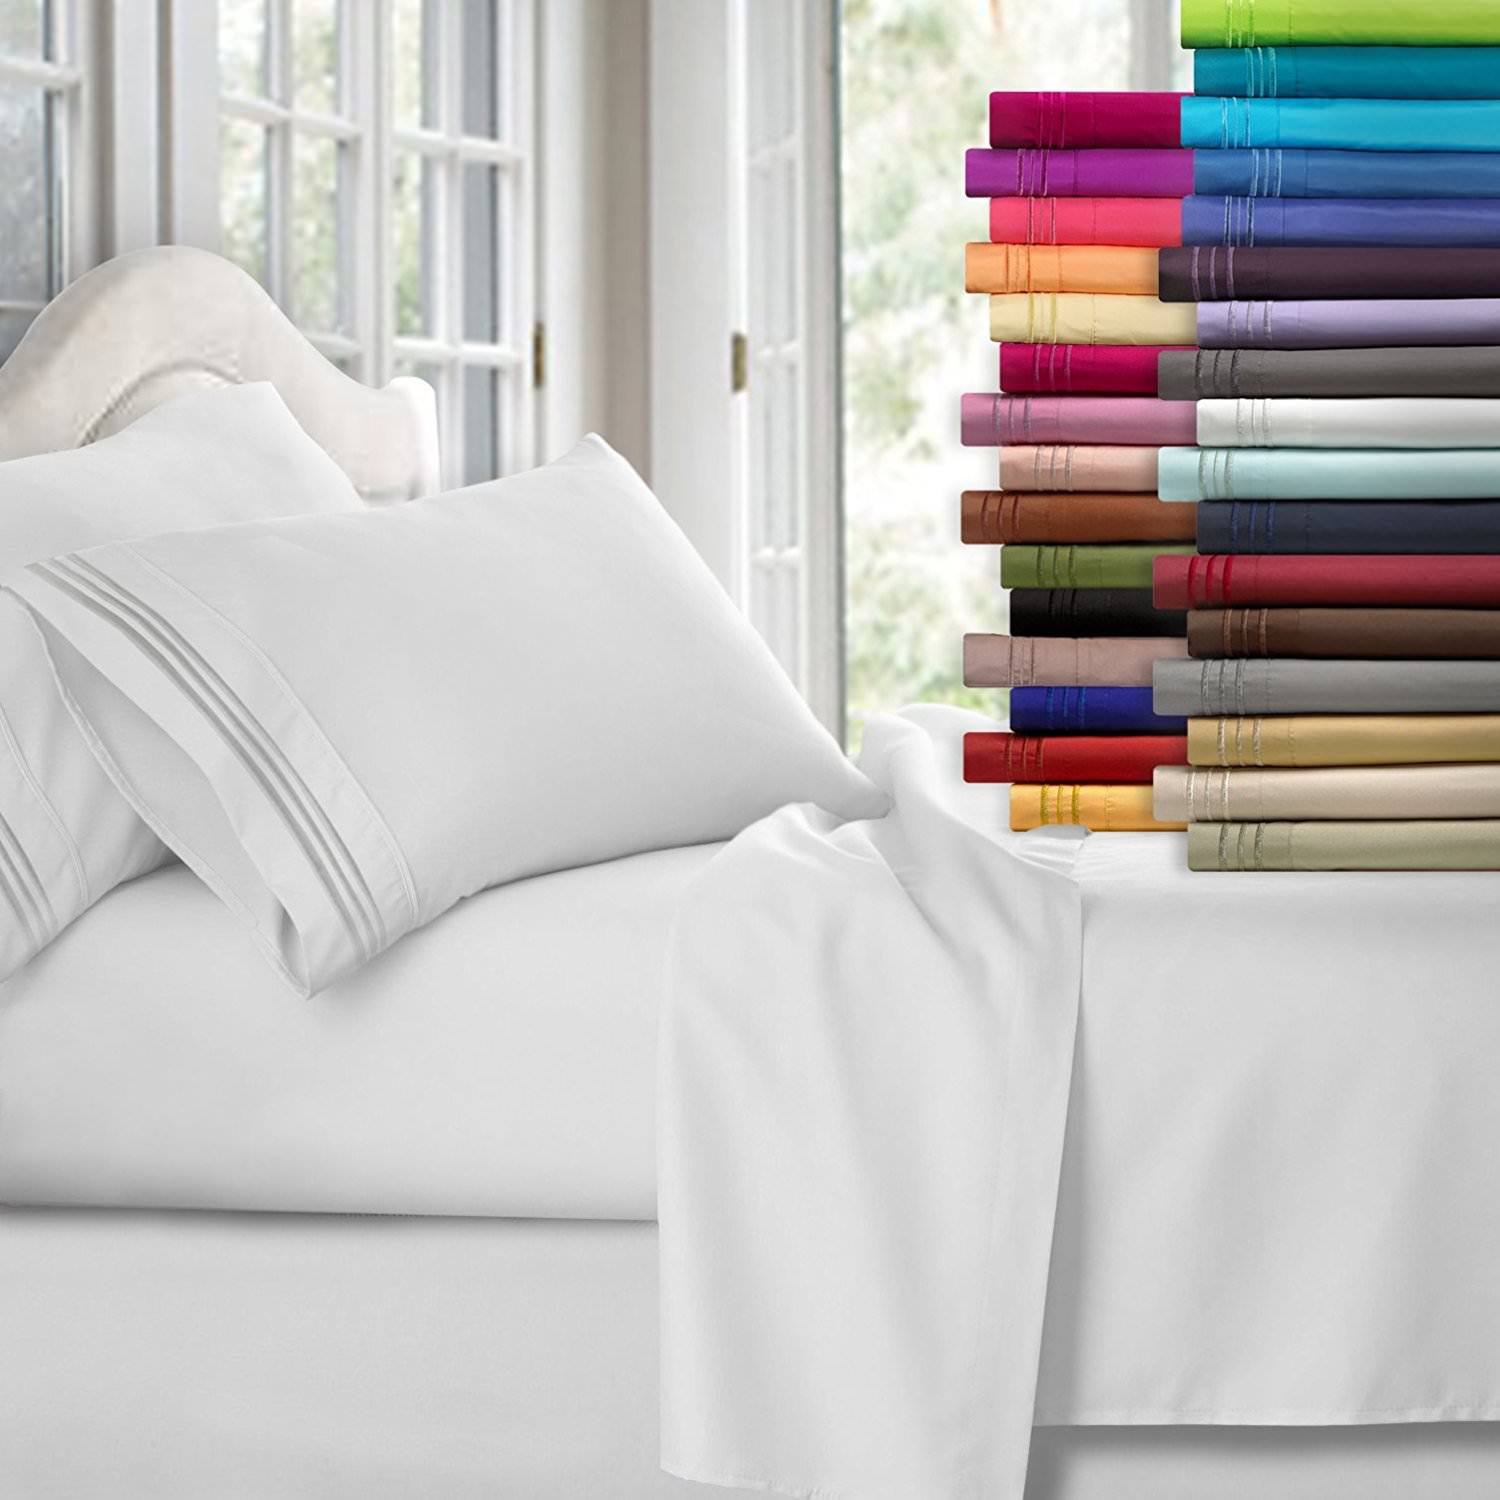 Royal Comfort 1500 Thread Count Cotton Rich Quilt Cover Set King